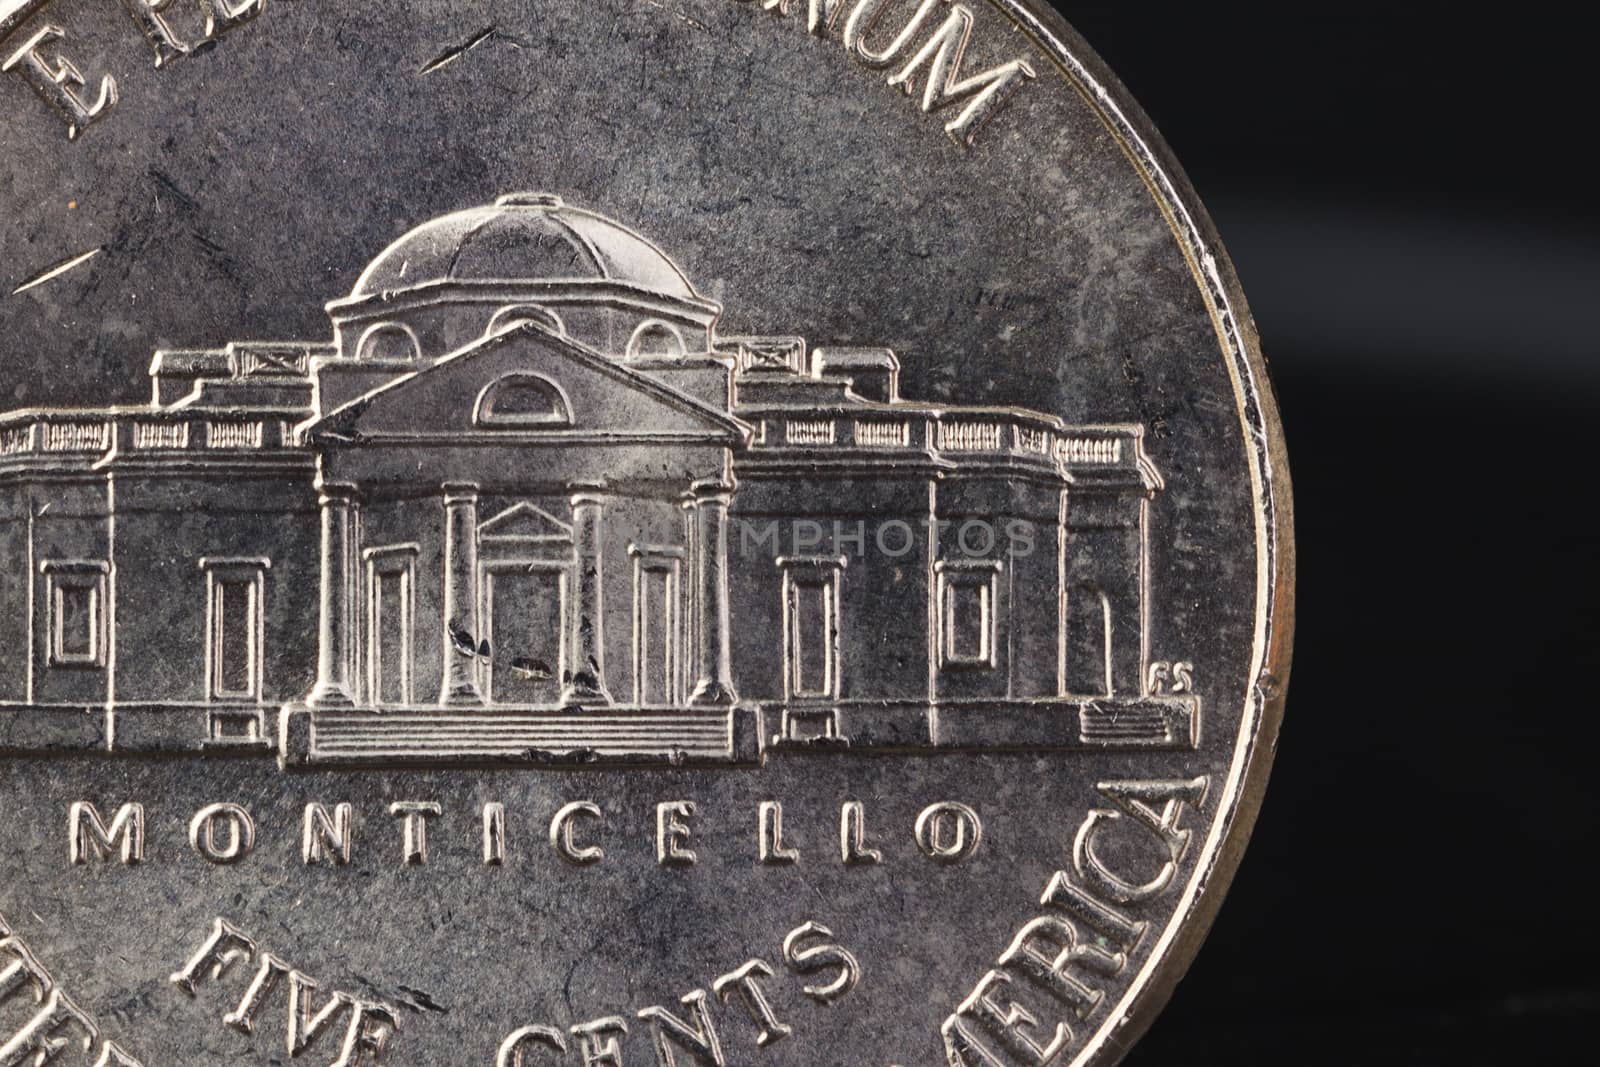 US American coin with wording "monticello" on black background by FrameAngel